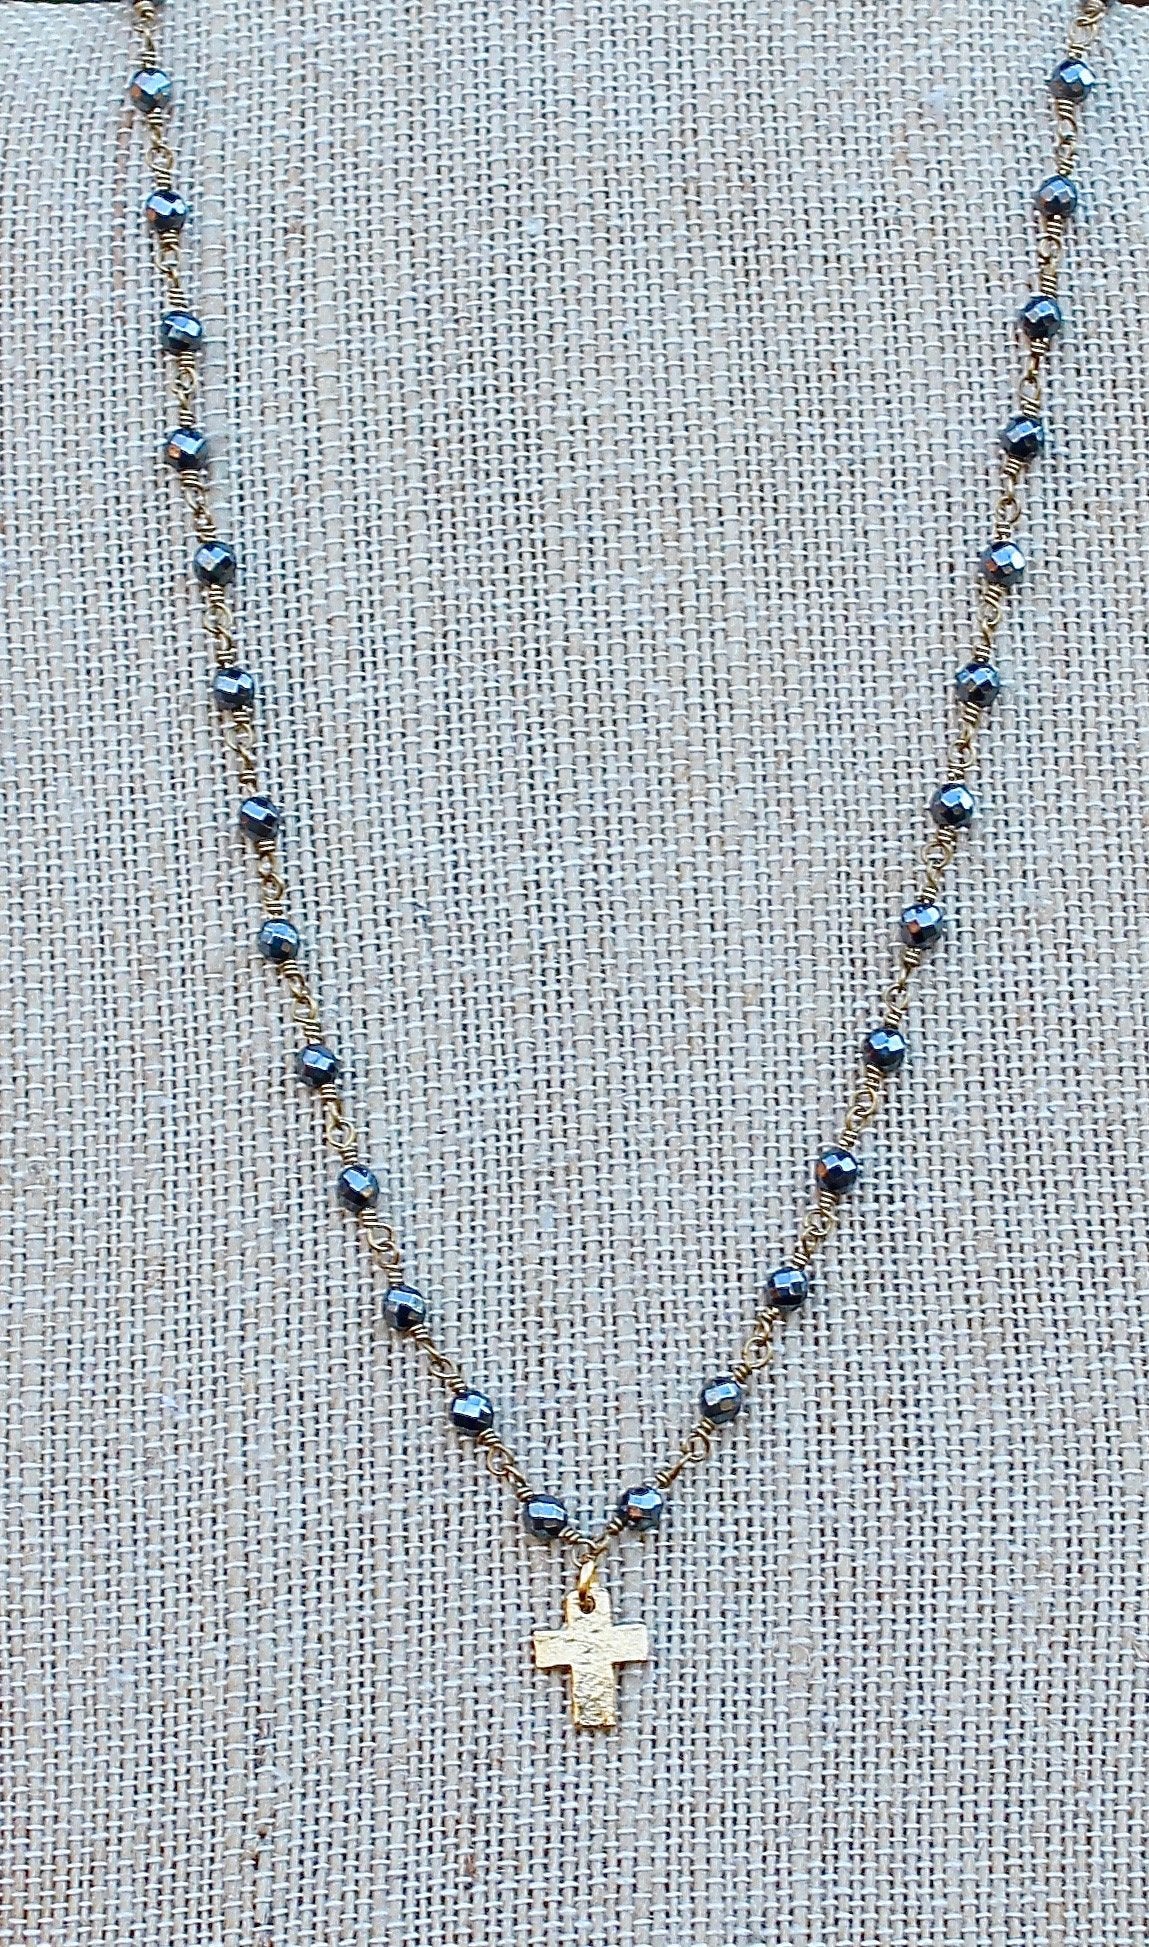 N141GH; Tiny Goldtone Cross; 3mm Goldtone Hematite Chain; Approximately 16 inches; ; ; ; Majestees